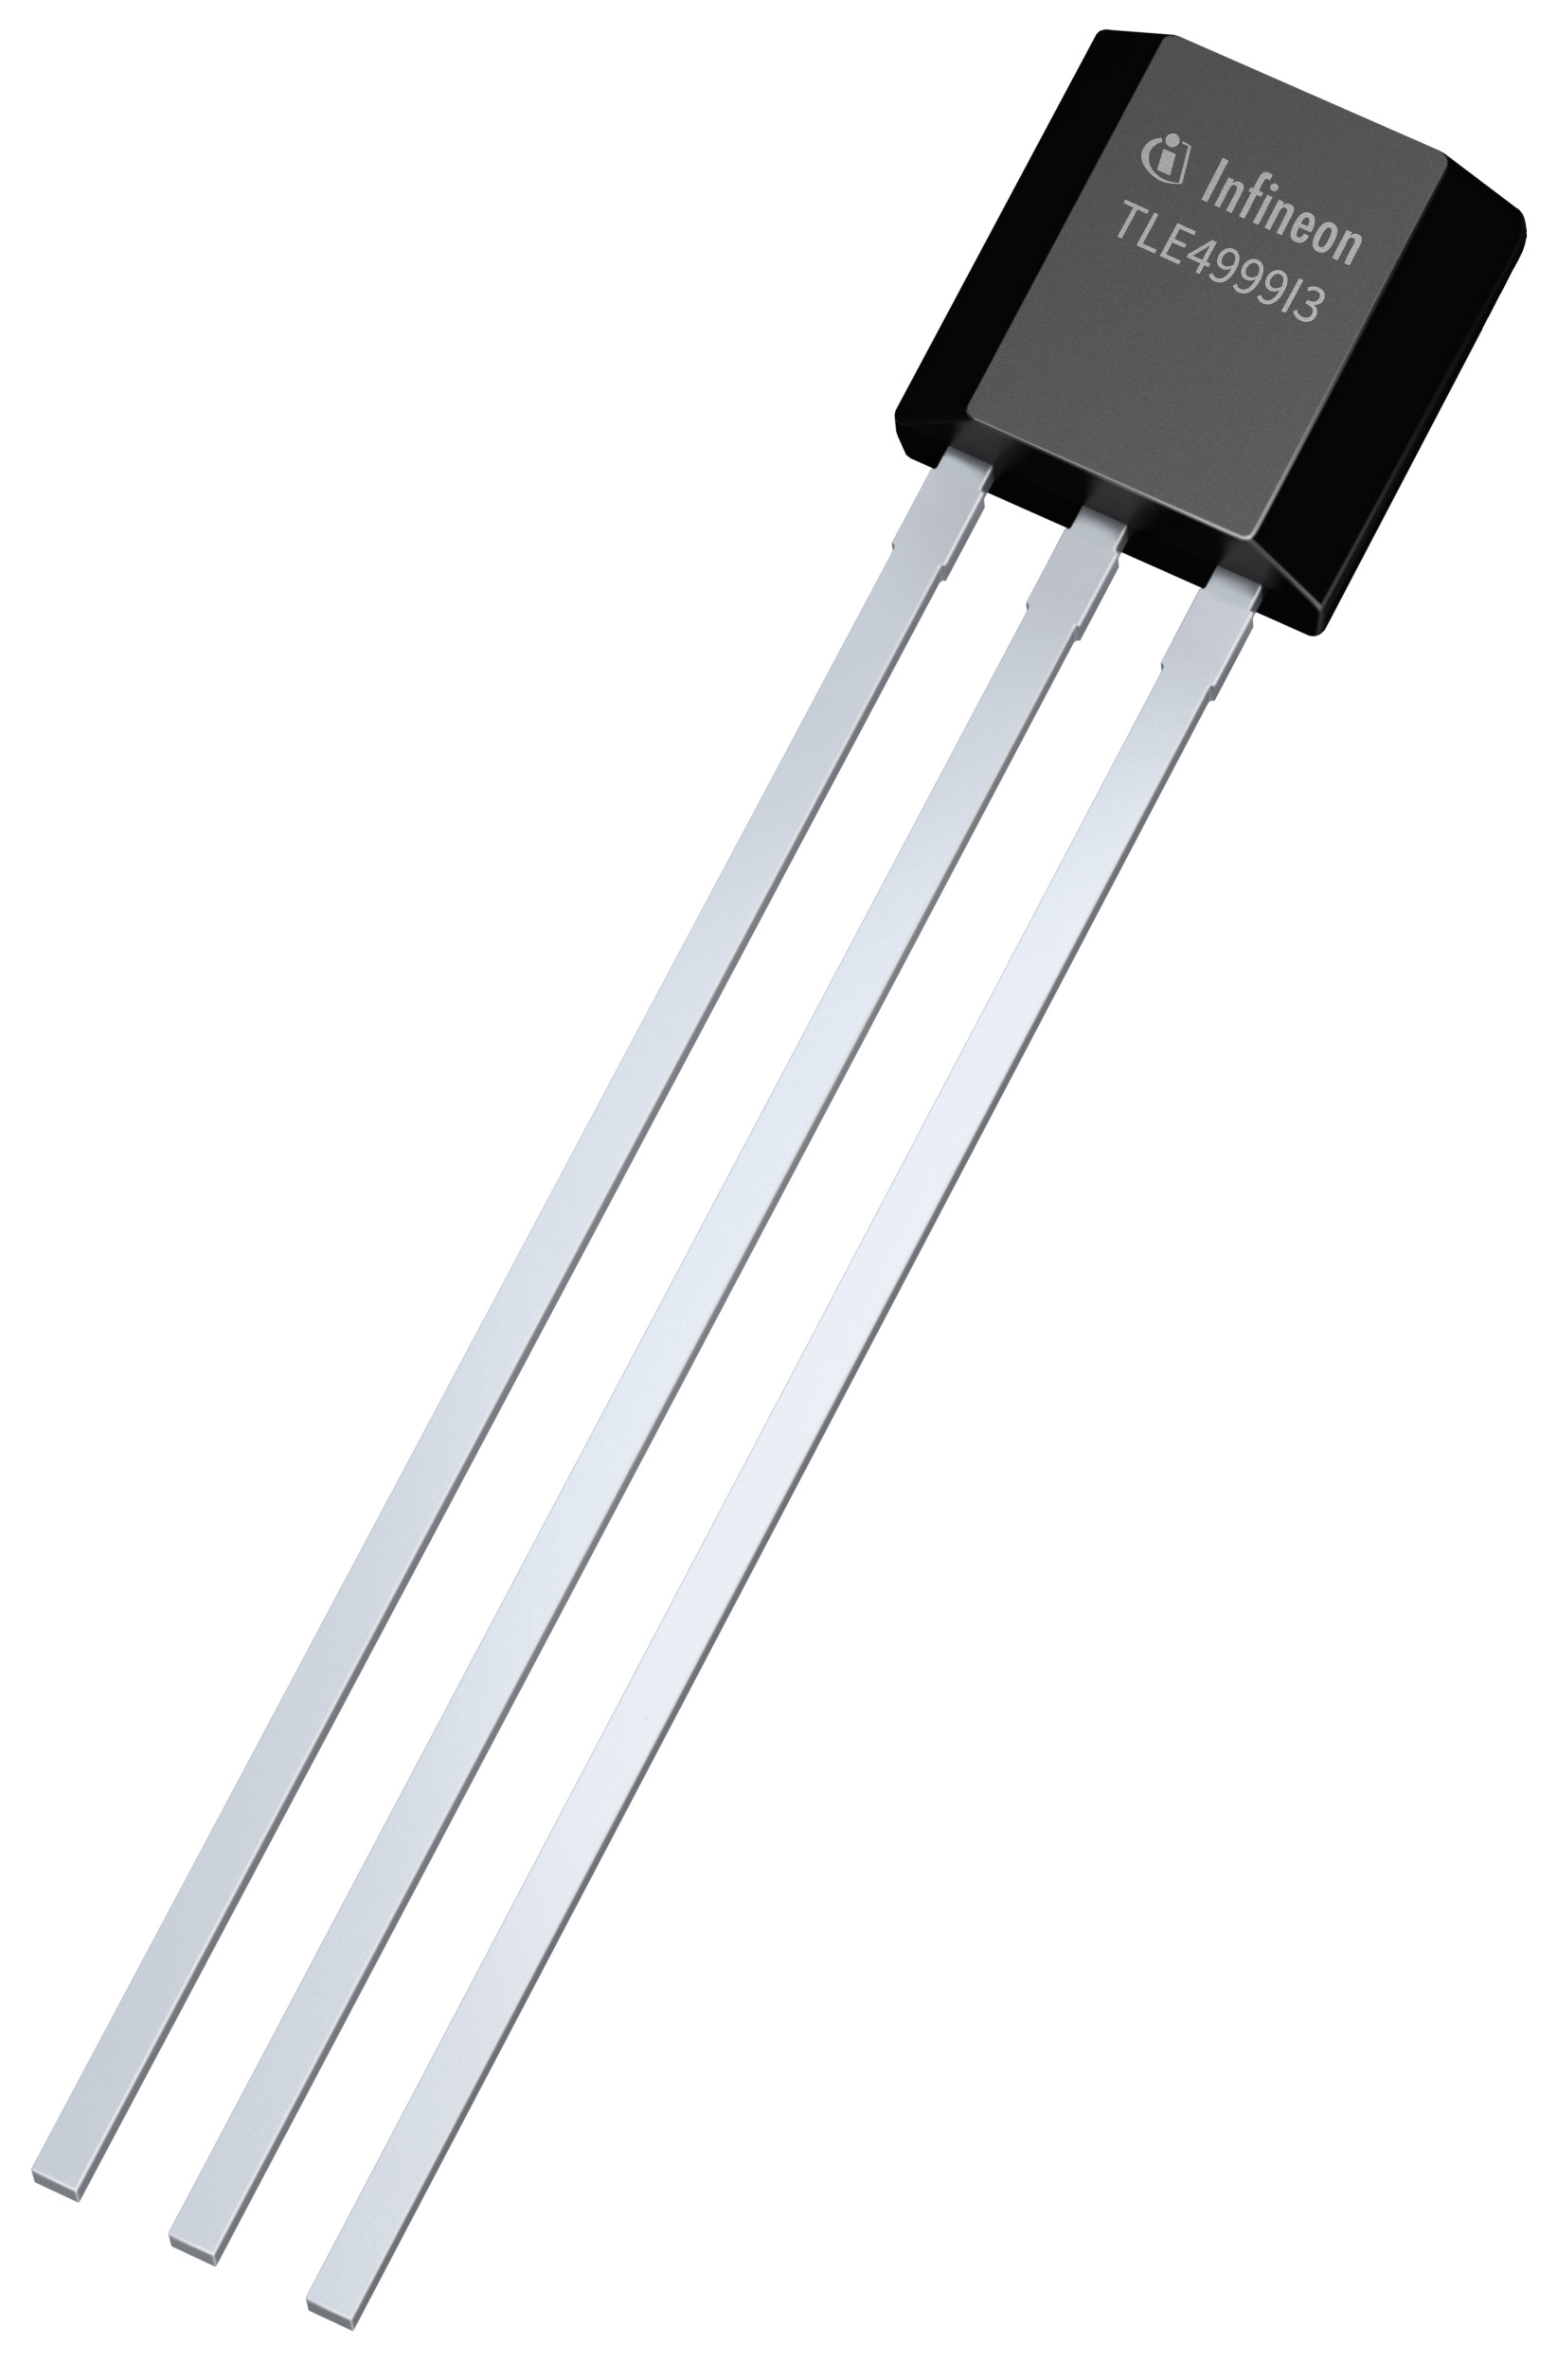 World’s first monolithically integrated linear Hall sensor for ASIL D systems